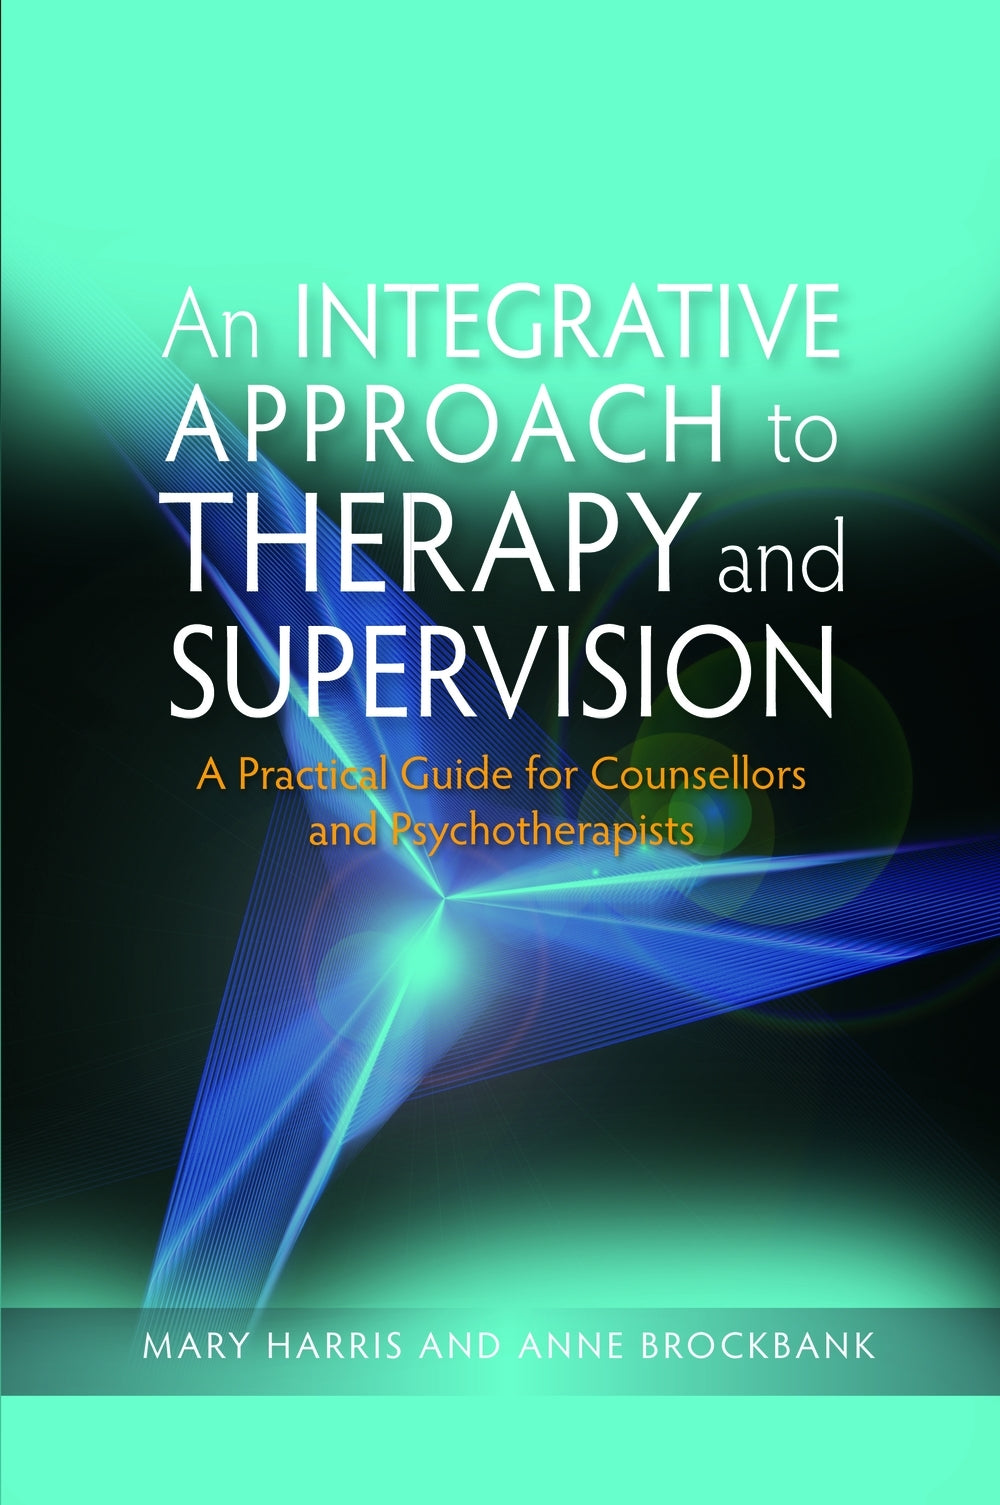 An Integrative Approach to Therapy and Supervision by Anne Brockbank, Mary Harris